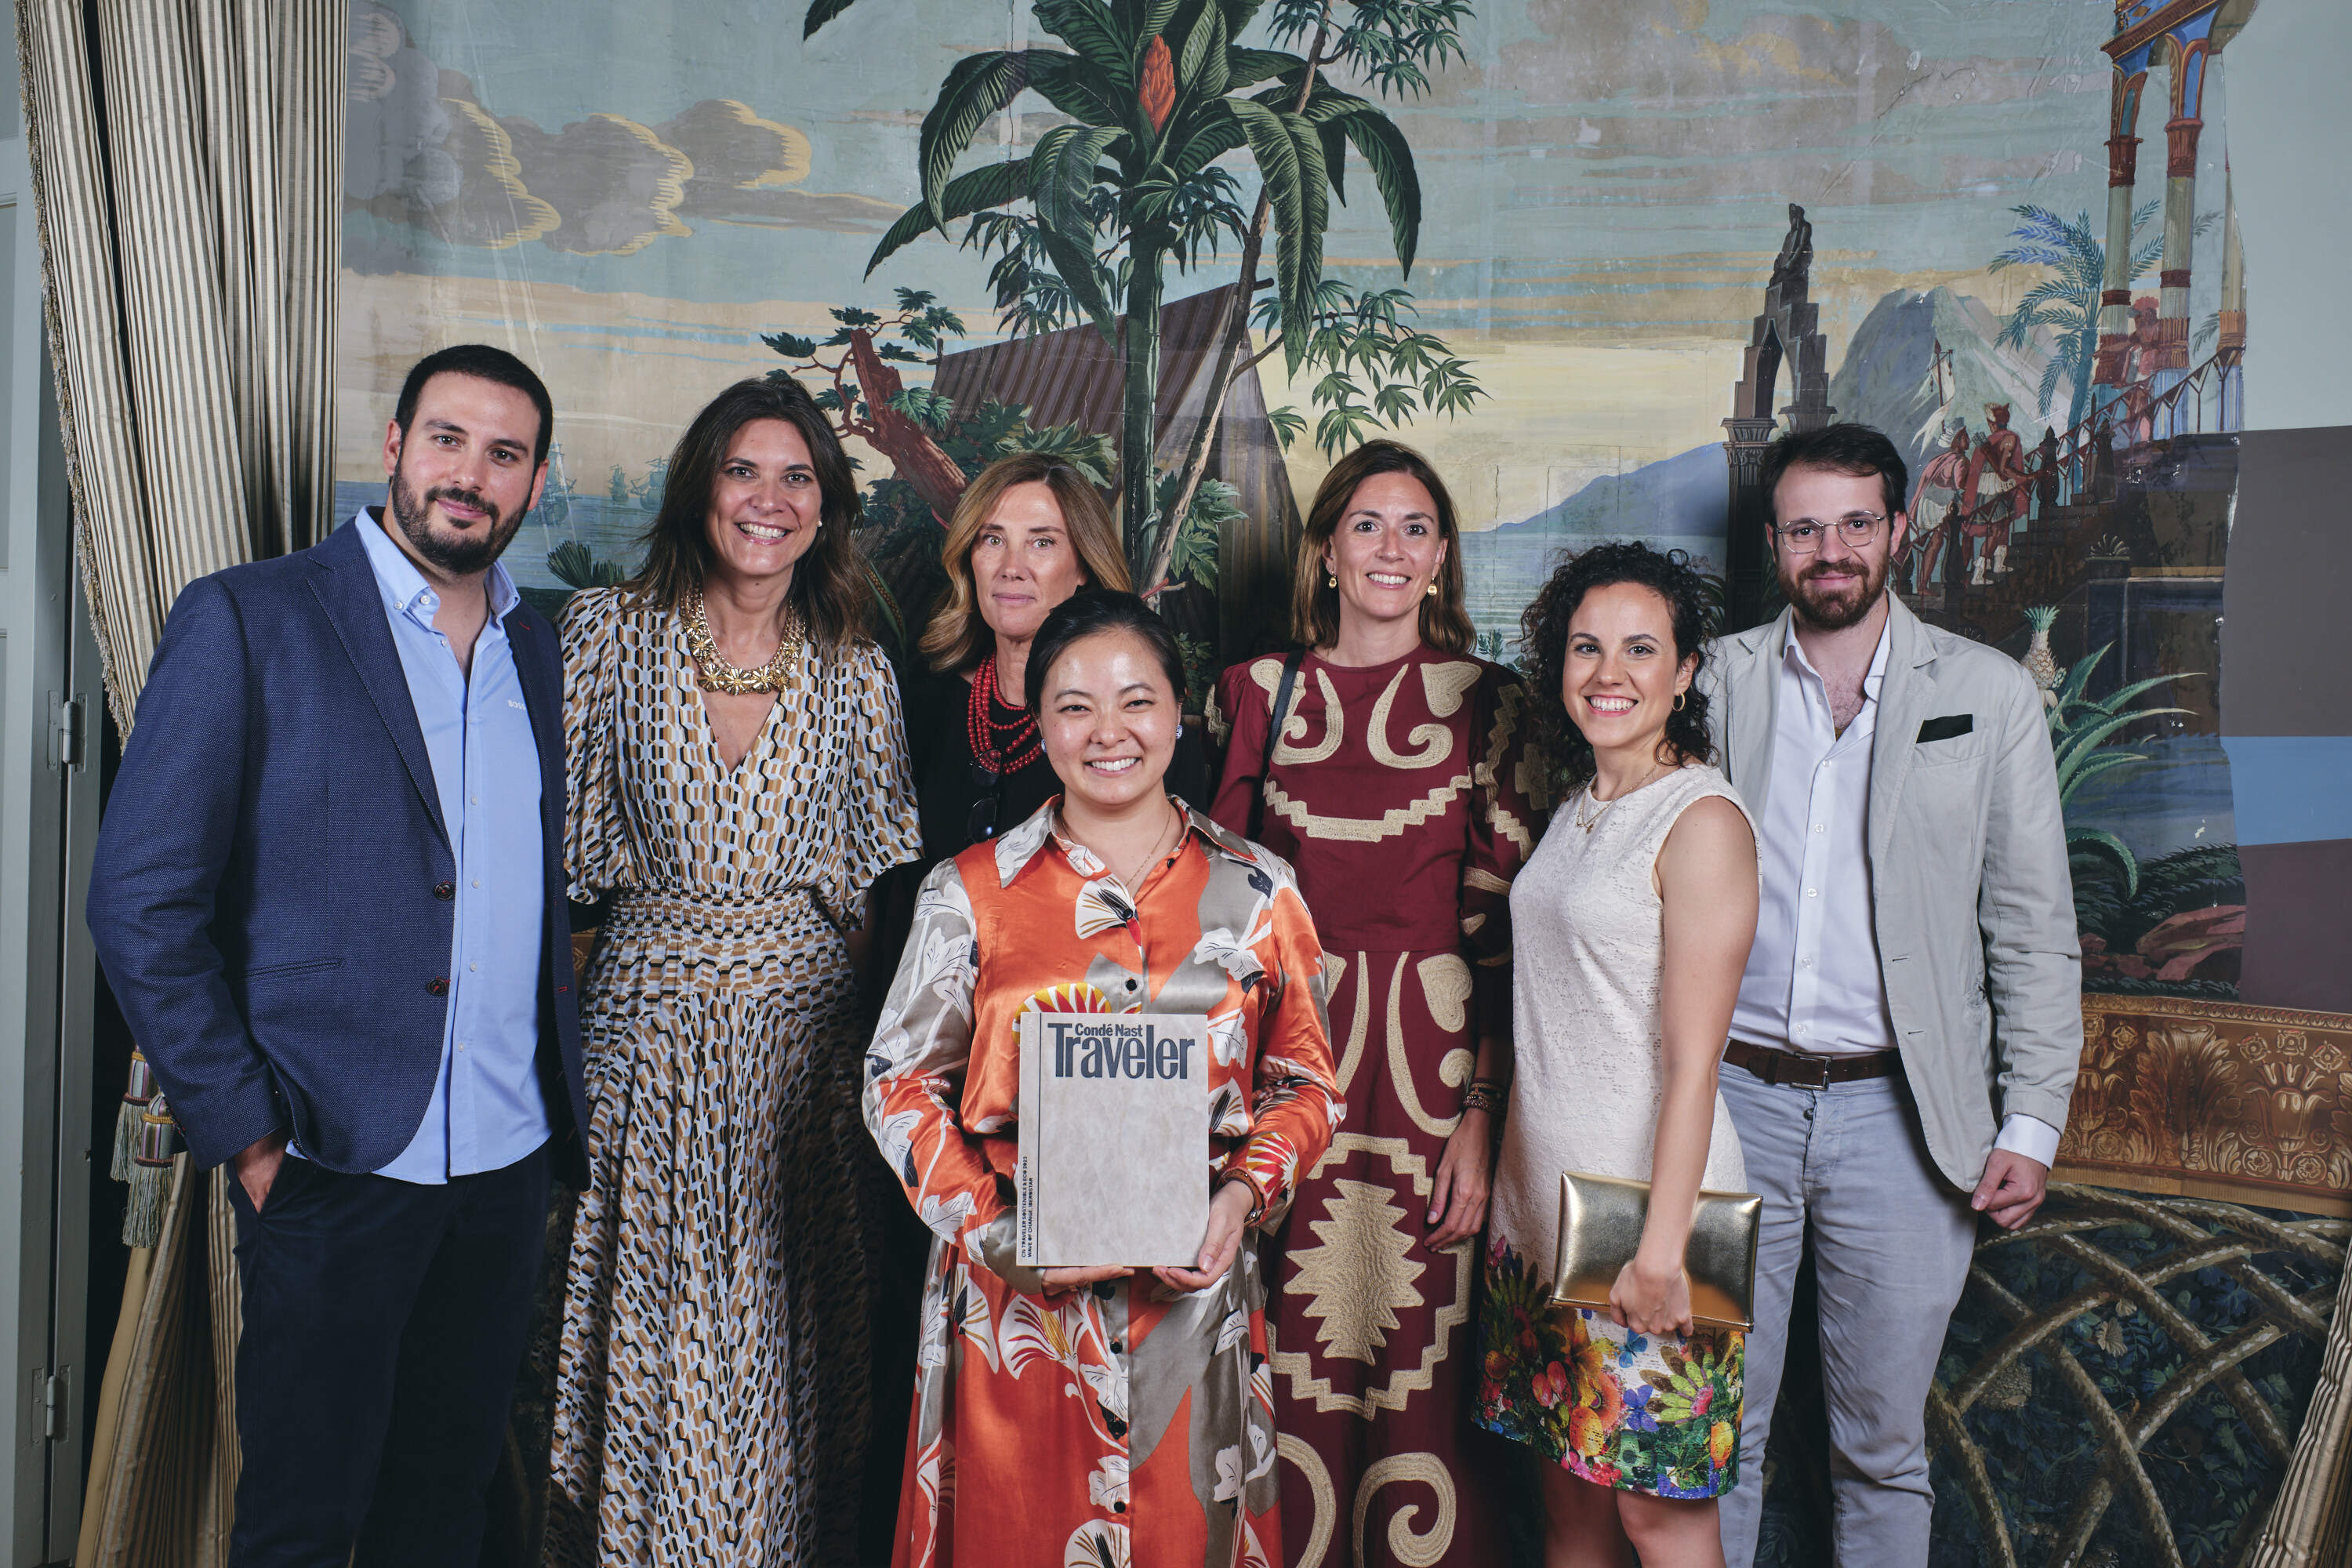 Iberostar Group awarded by Condé Nast Traveler Spain for its pioneering work in the field of sustainability